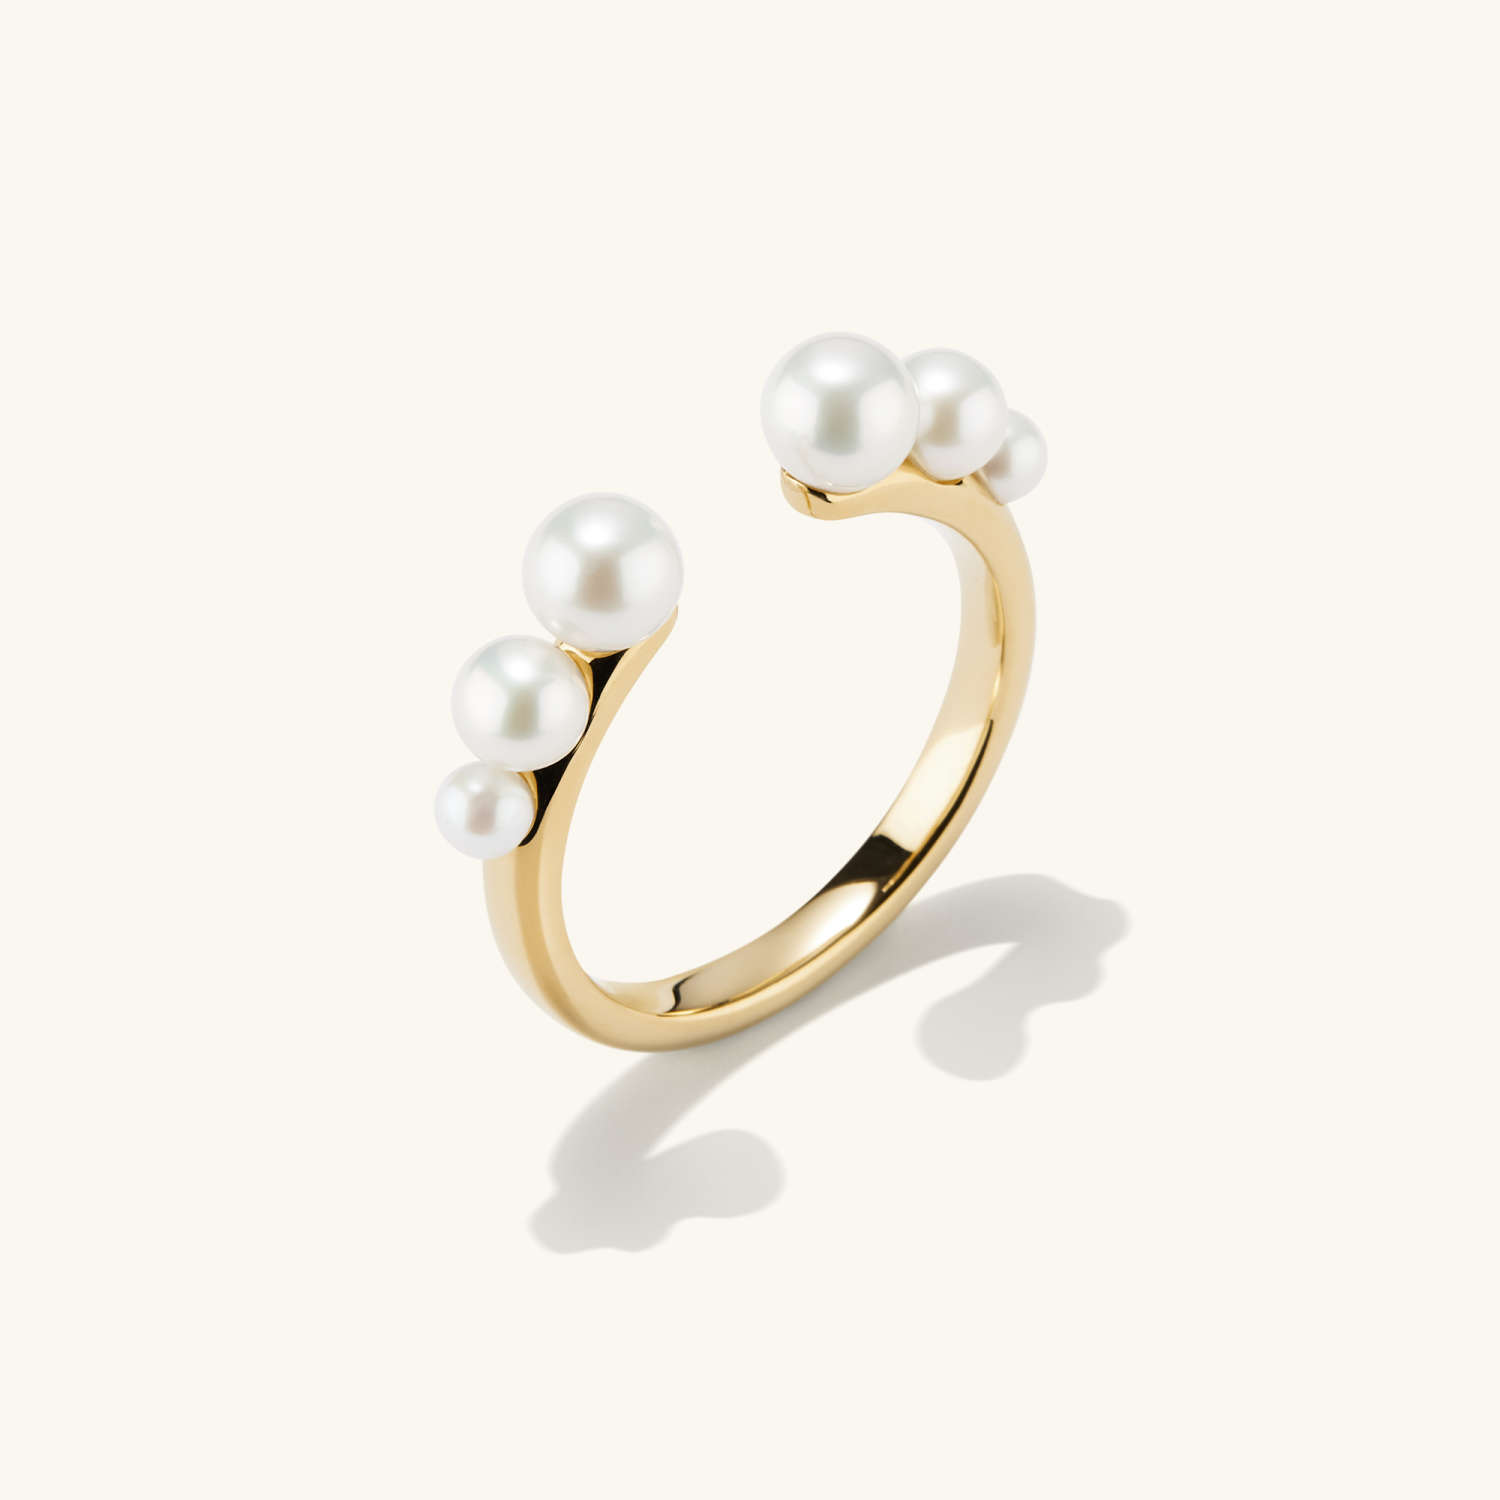 Pearls Are Back! Discover The Best Modern Pearl Jewelry